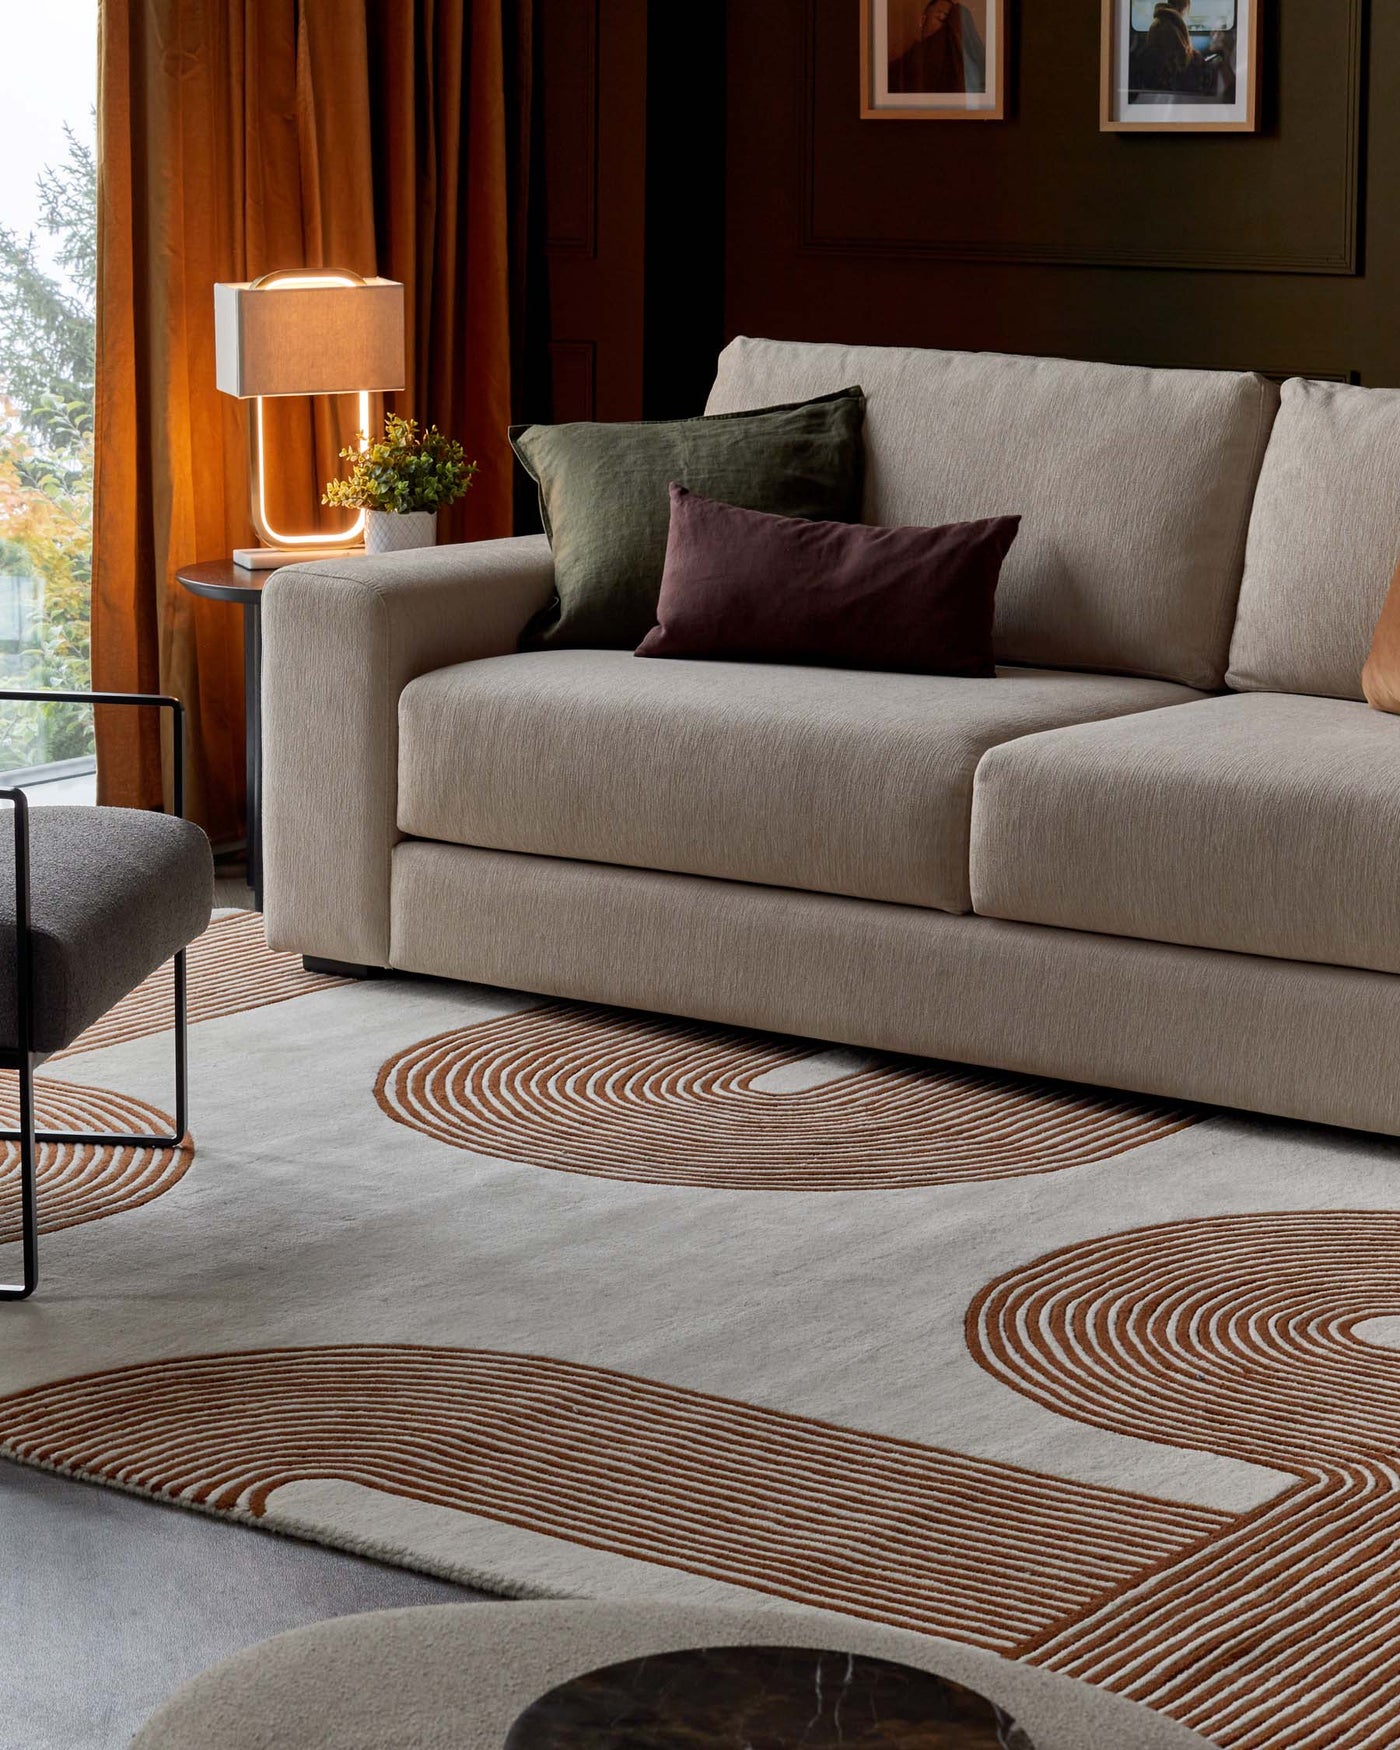 Elegant contemporary beige upholstered three-seat sofa with plush cushions, accompanied by a matching fabric round side chair. A warm copper-toned floor lamp with a geometric design stands atop a sleek circular side table, enhancing the cosy ambiance. The room features a large patterned area rug with swirl motifs in neutral and rust tones, set against a richly textured hardwood floor.